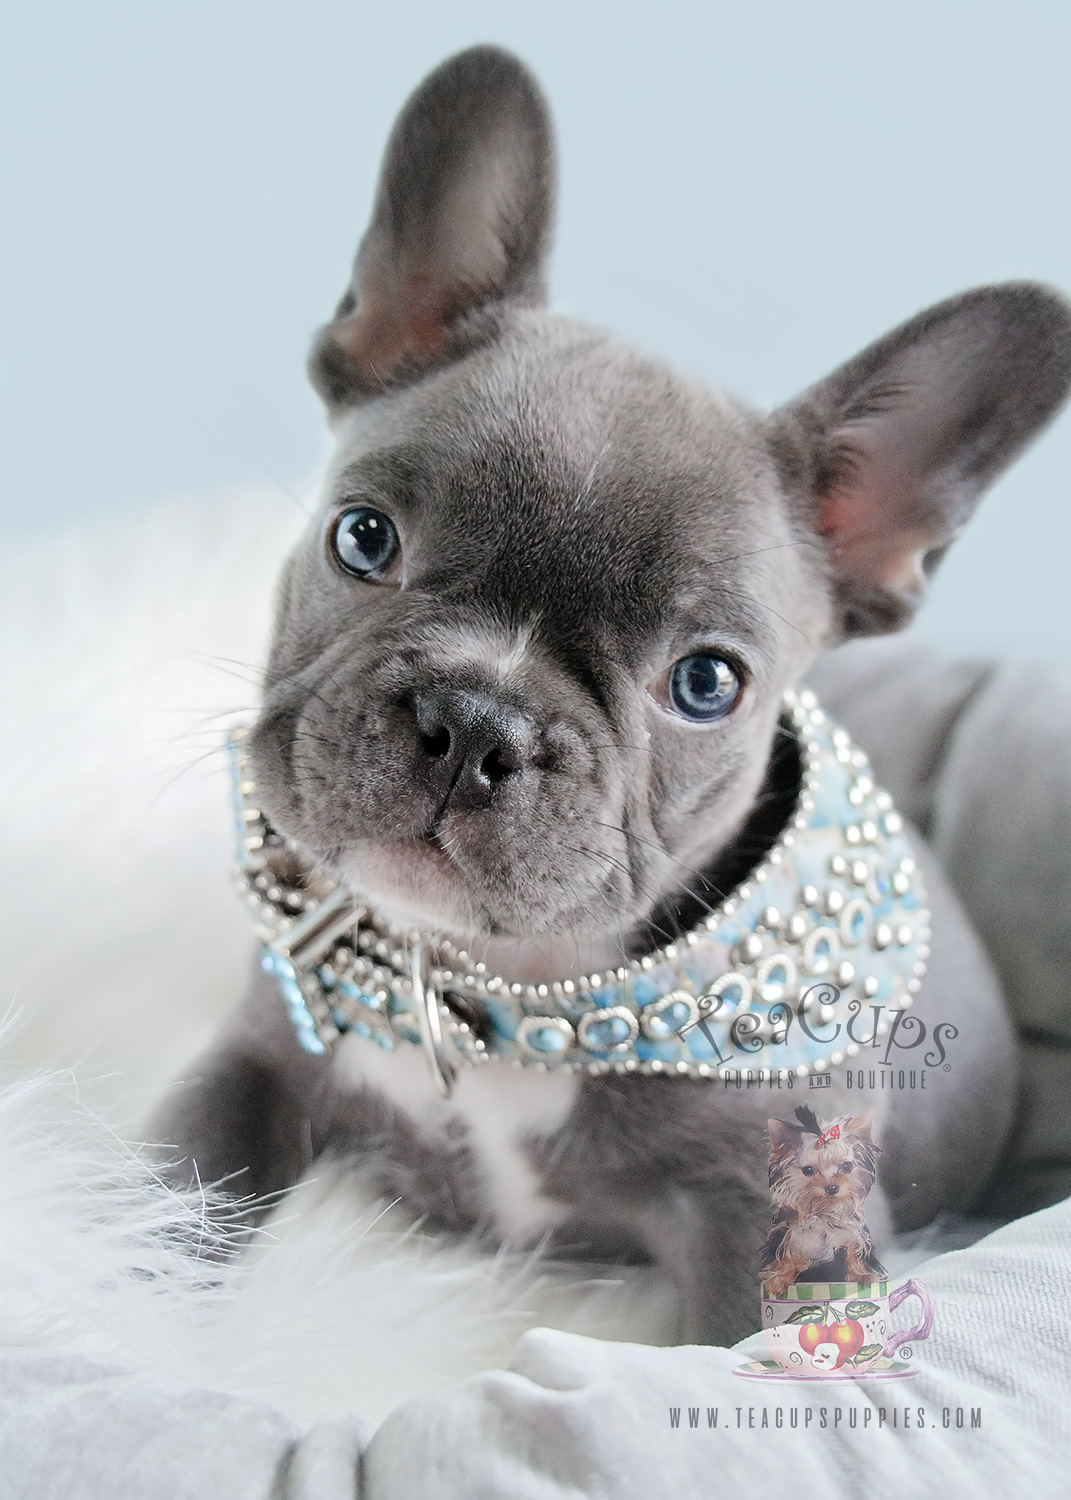 Blue Male Frenchie Puppies For Sale in Davie FL | Teacups, Puppies ...